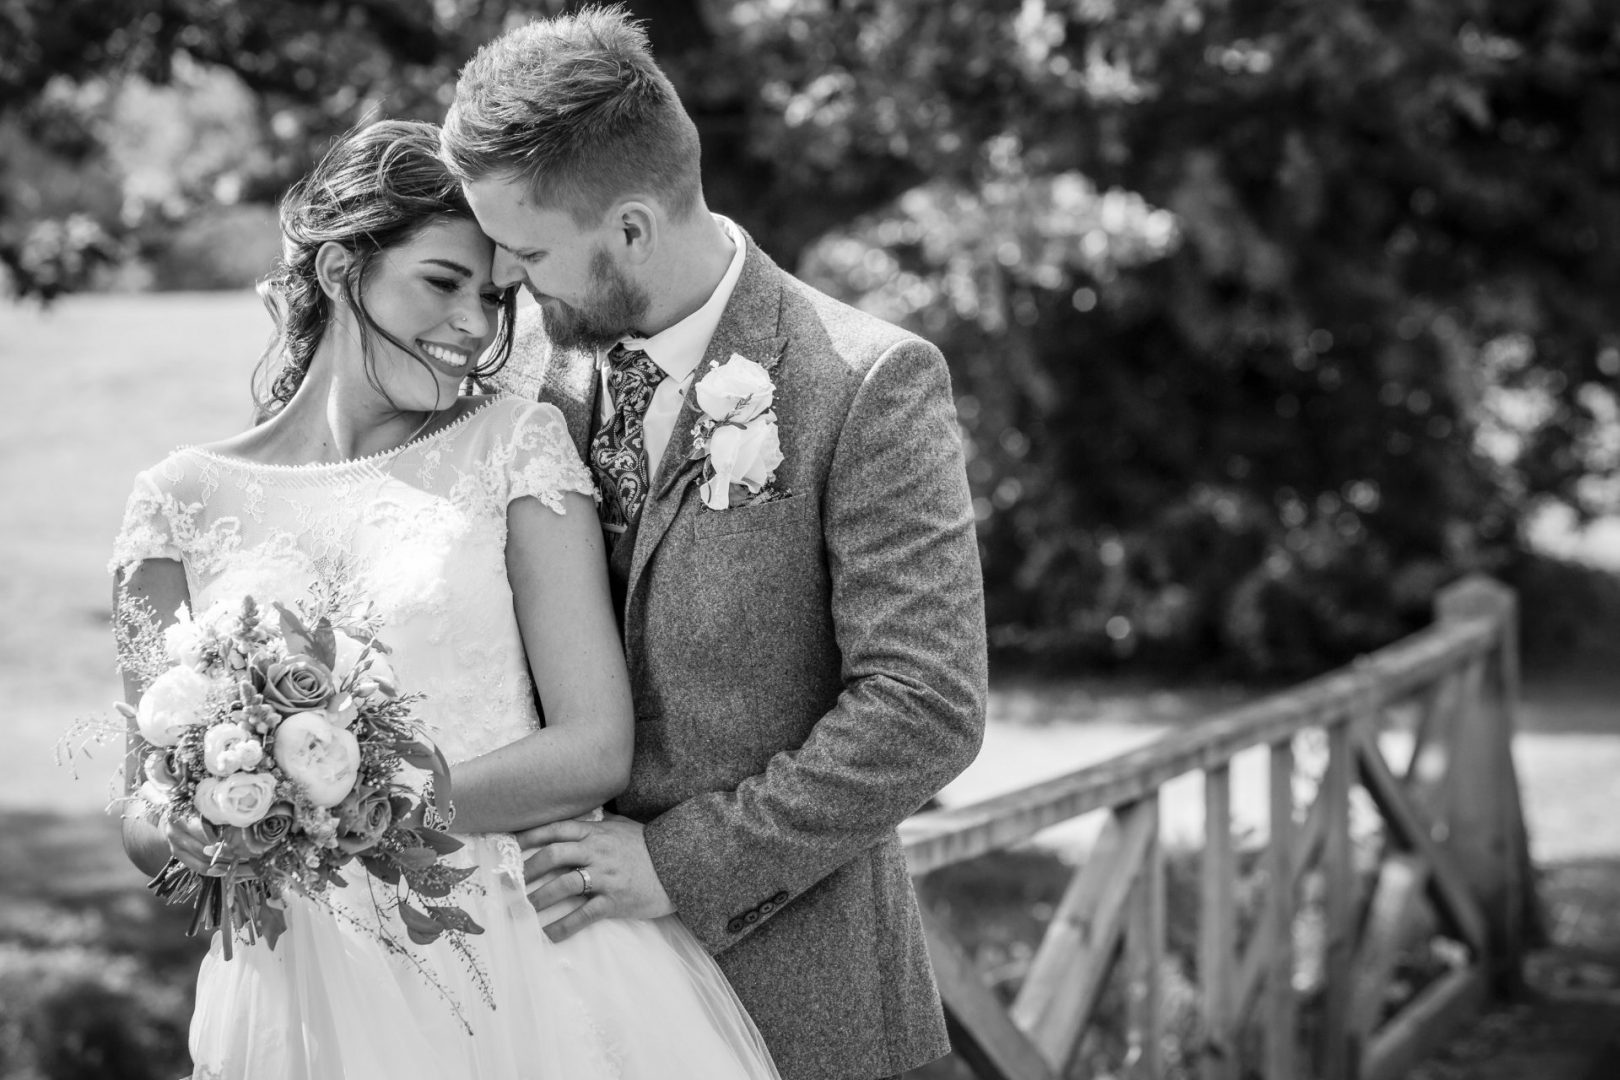 Essex Wedding Photographer - a black and white image of a bride and groom hugging